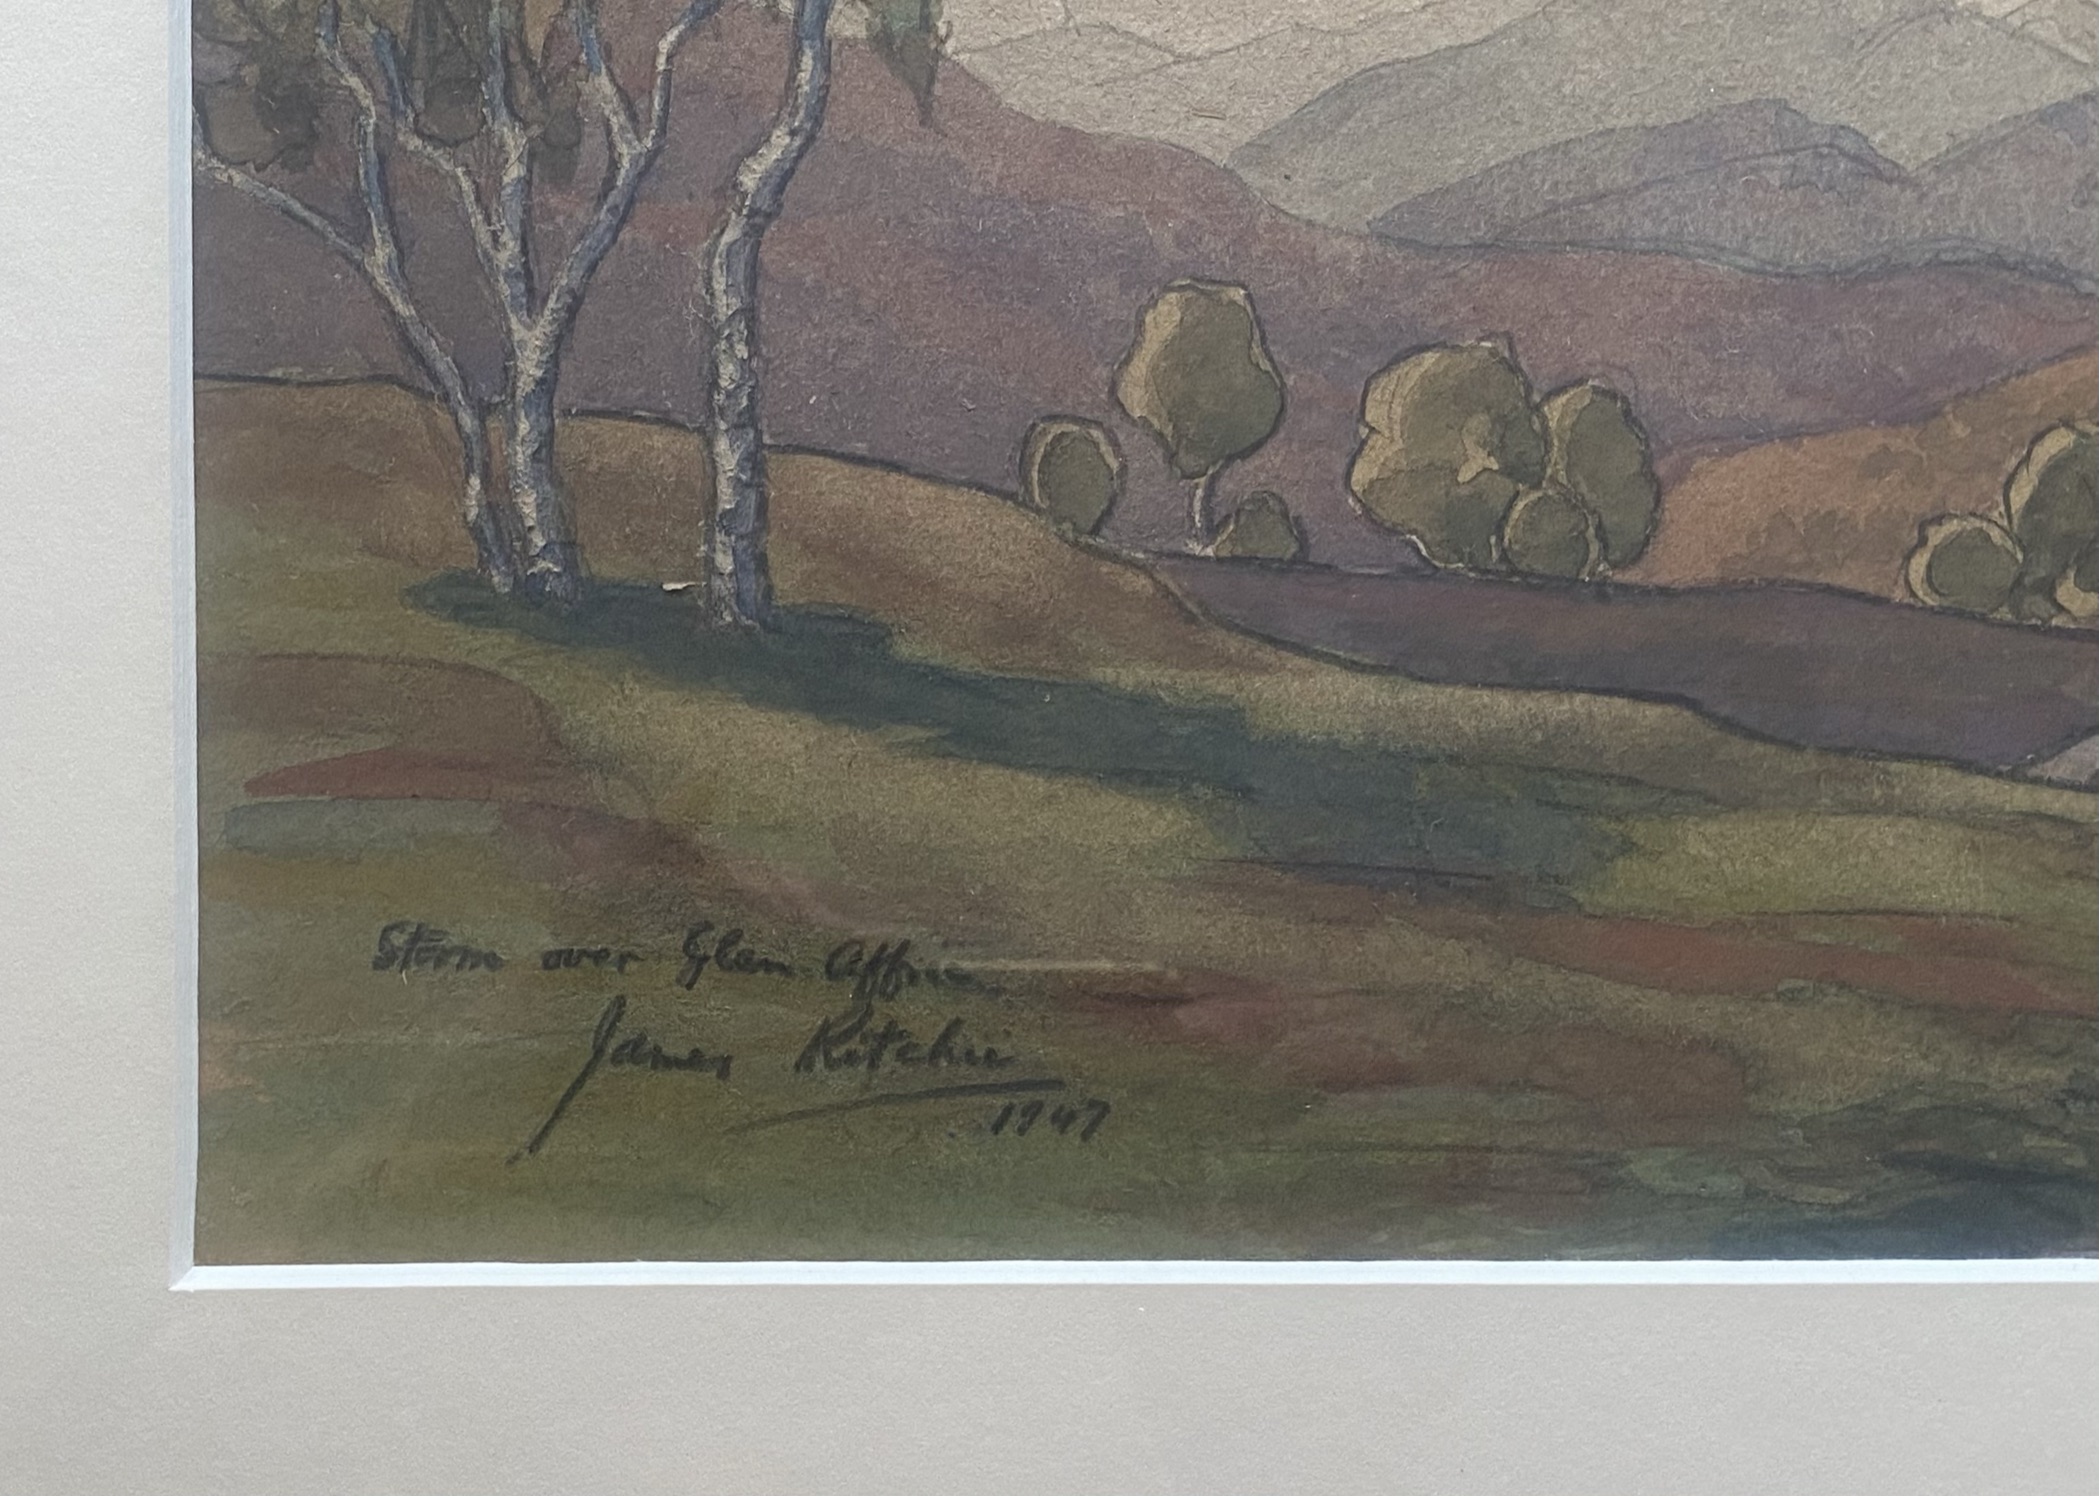 John Ritchie (Scottish) signed watercolour “Storm over the Glen” - Image 3 of 3